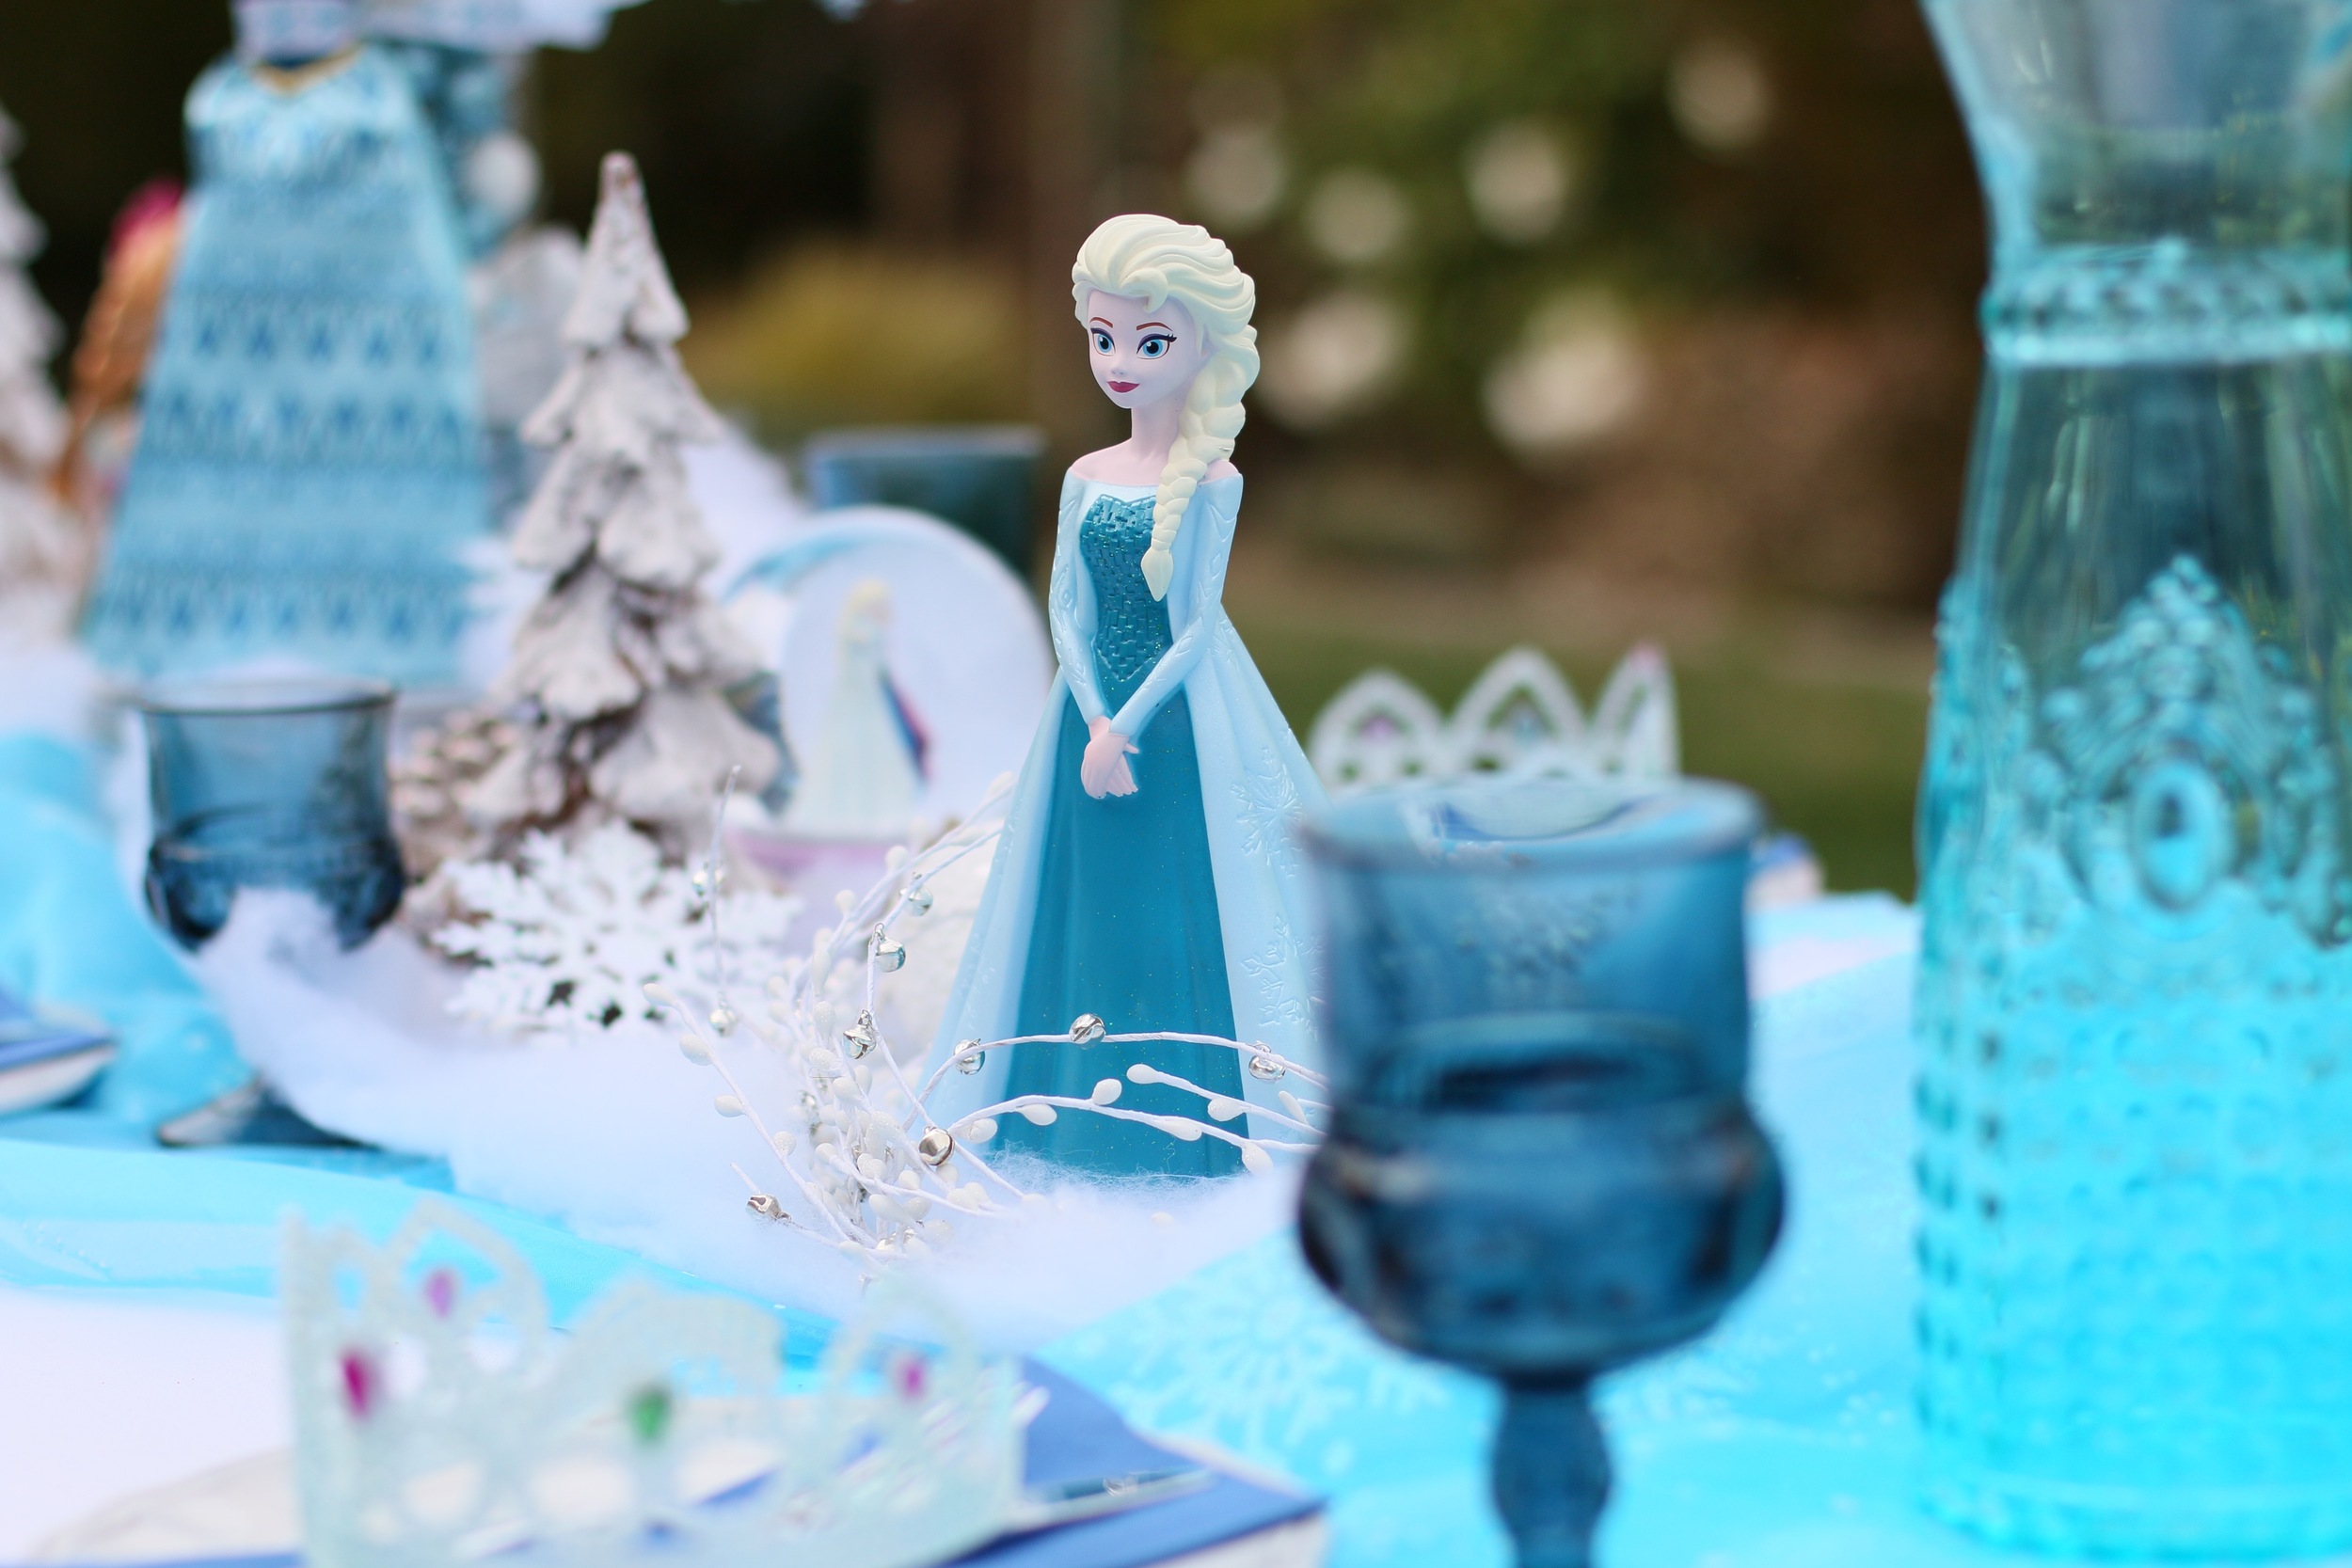 Copy of Frozen character dolls, cool blues, silvery whites, & wintery accents! Brrrrr I feel "Frozen"! @inJOYtheParty